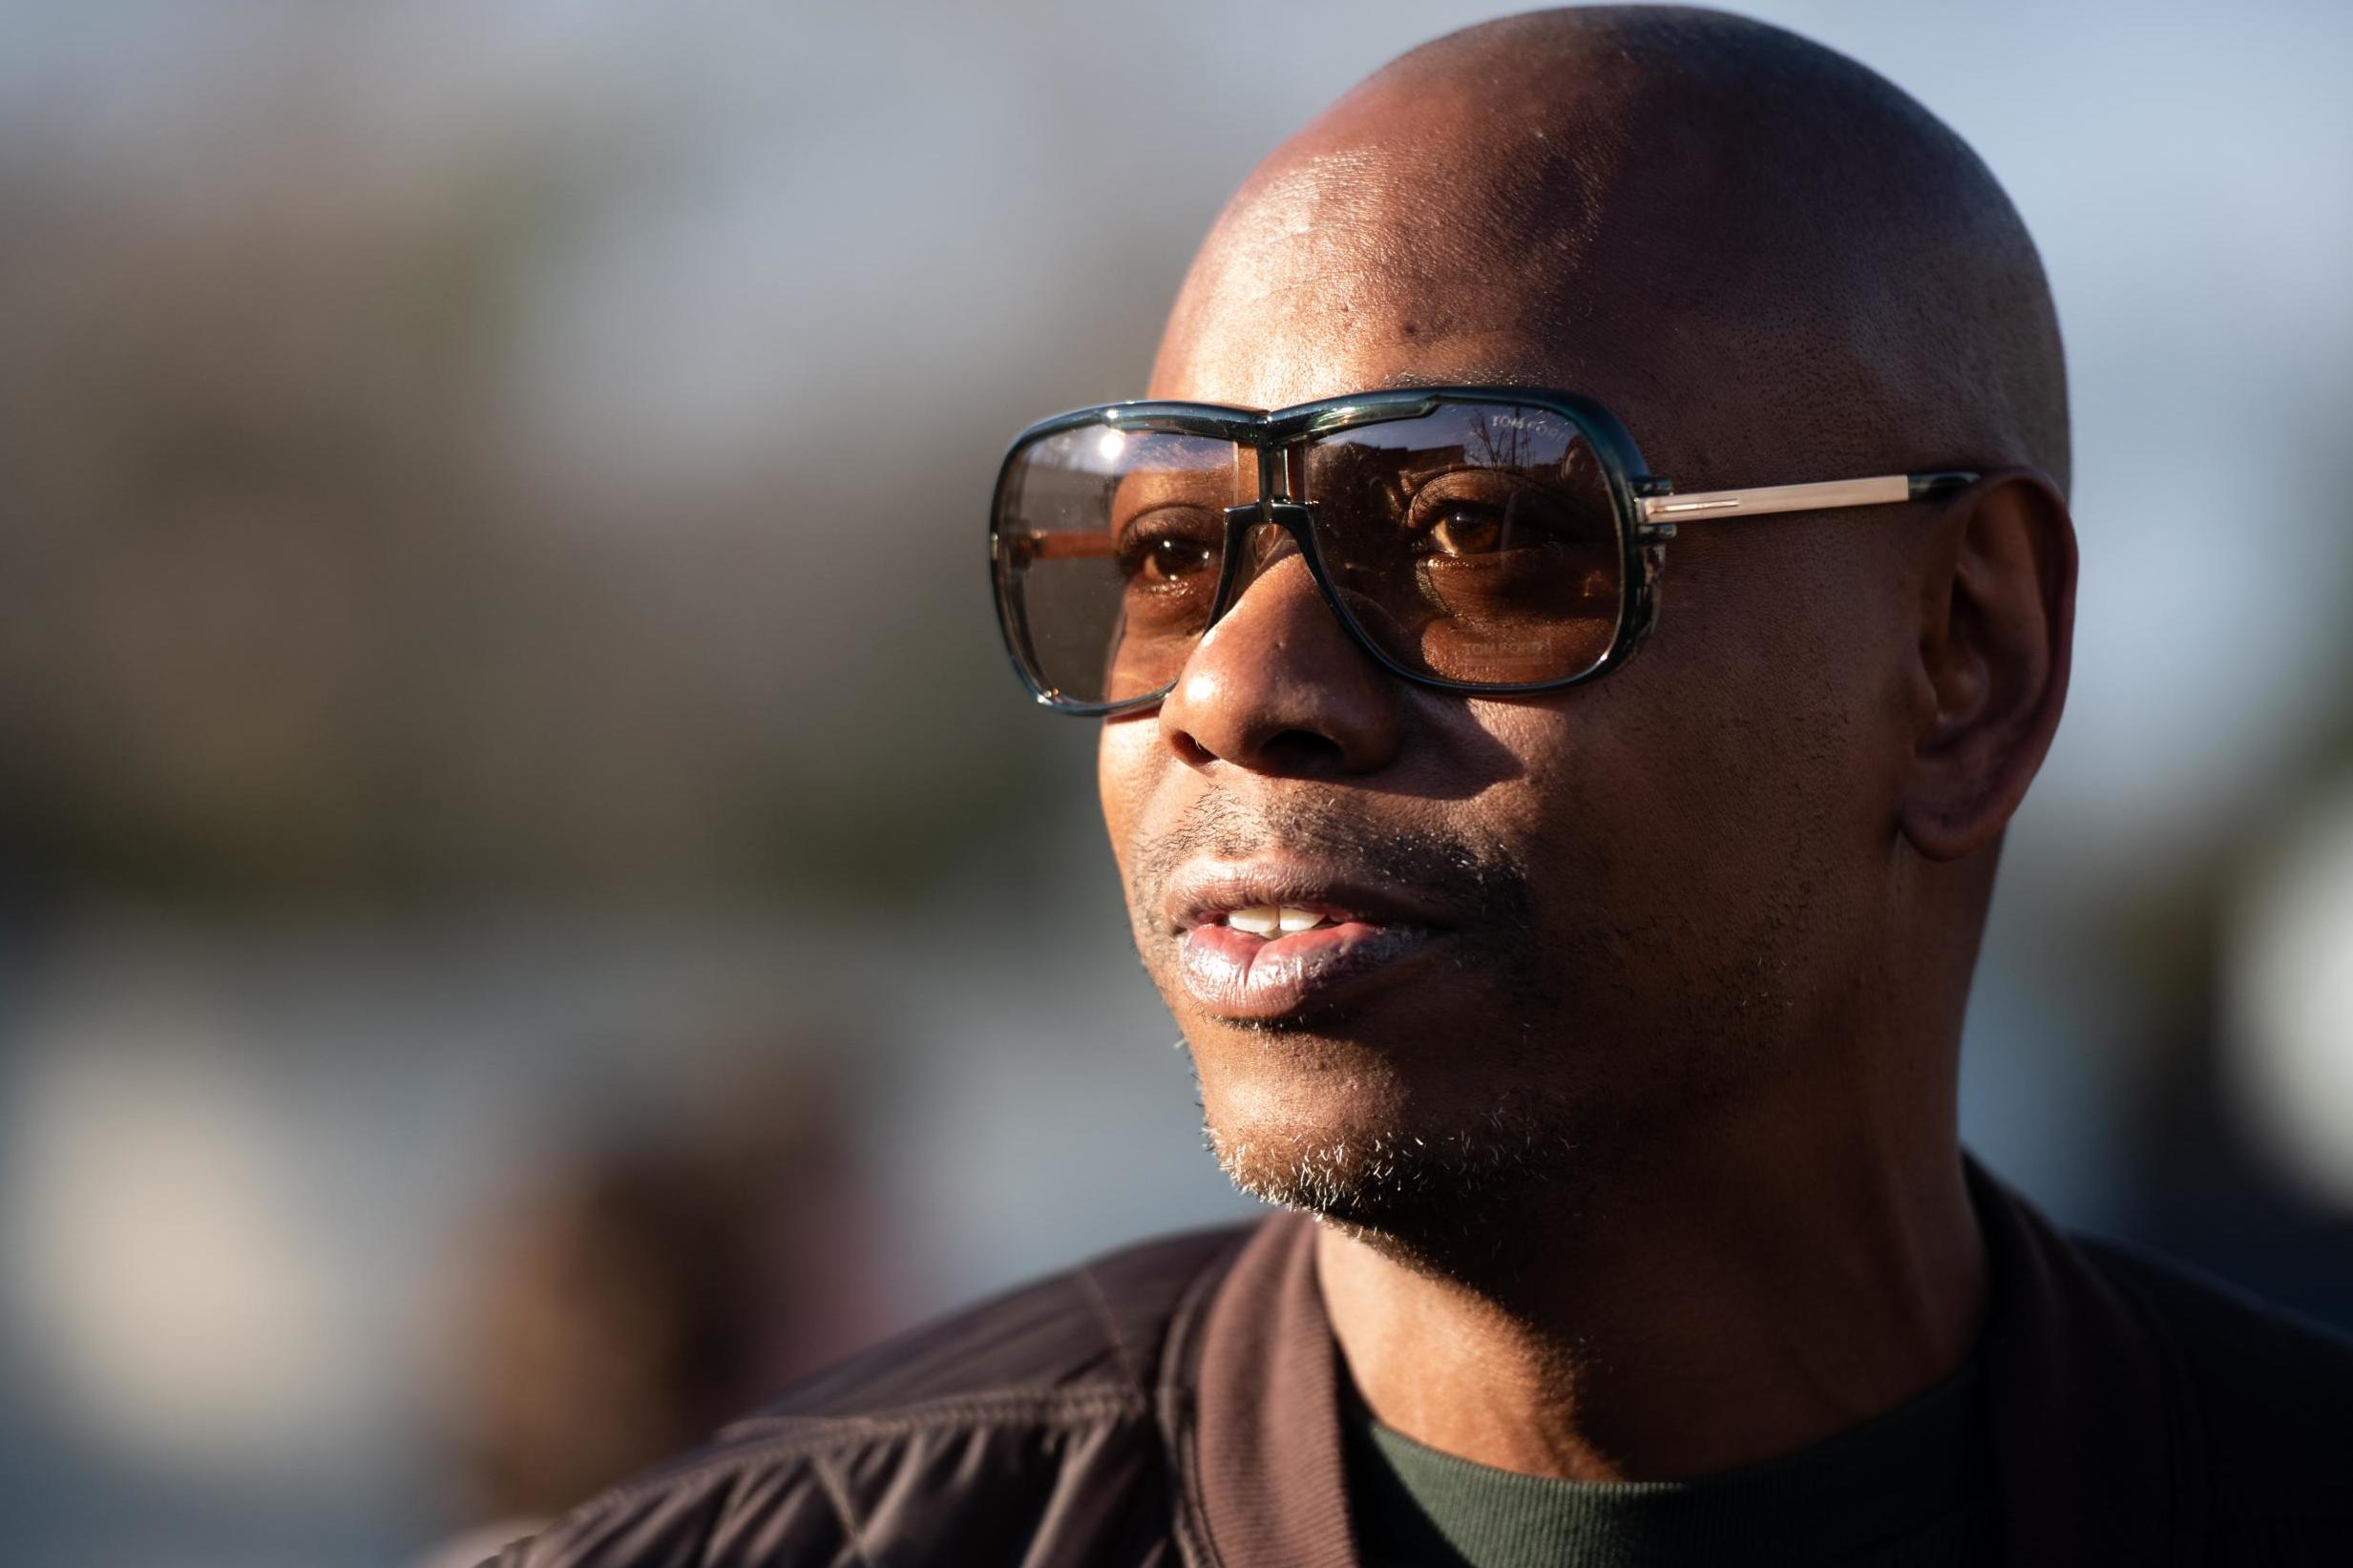 Dave Chappelle campaigns for Democratic presidential candidate Andrew Yang on 30 January 2020 in North Charleston, South Carolina.